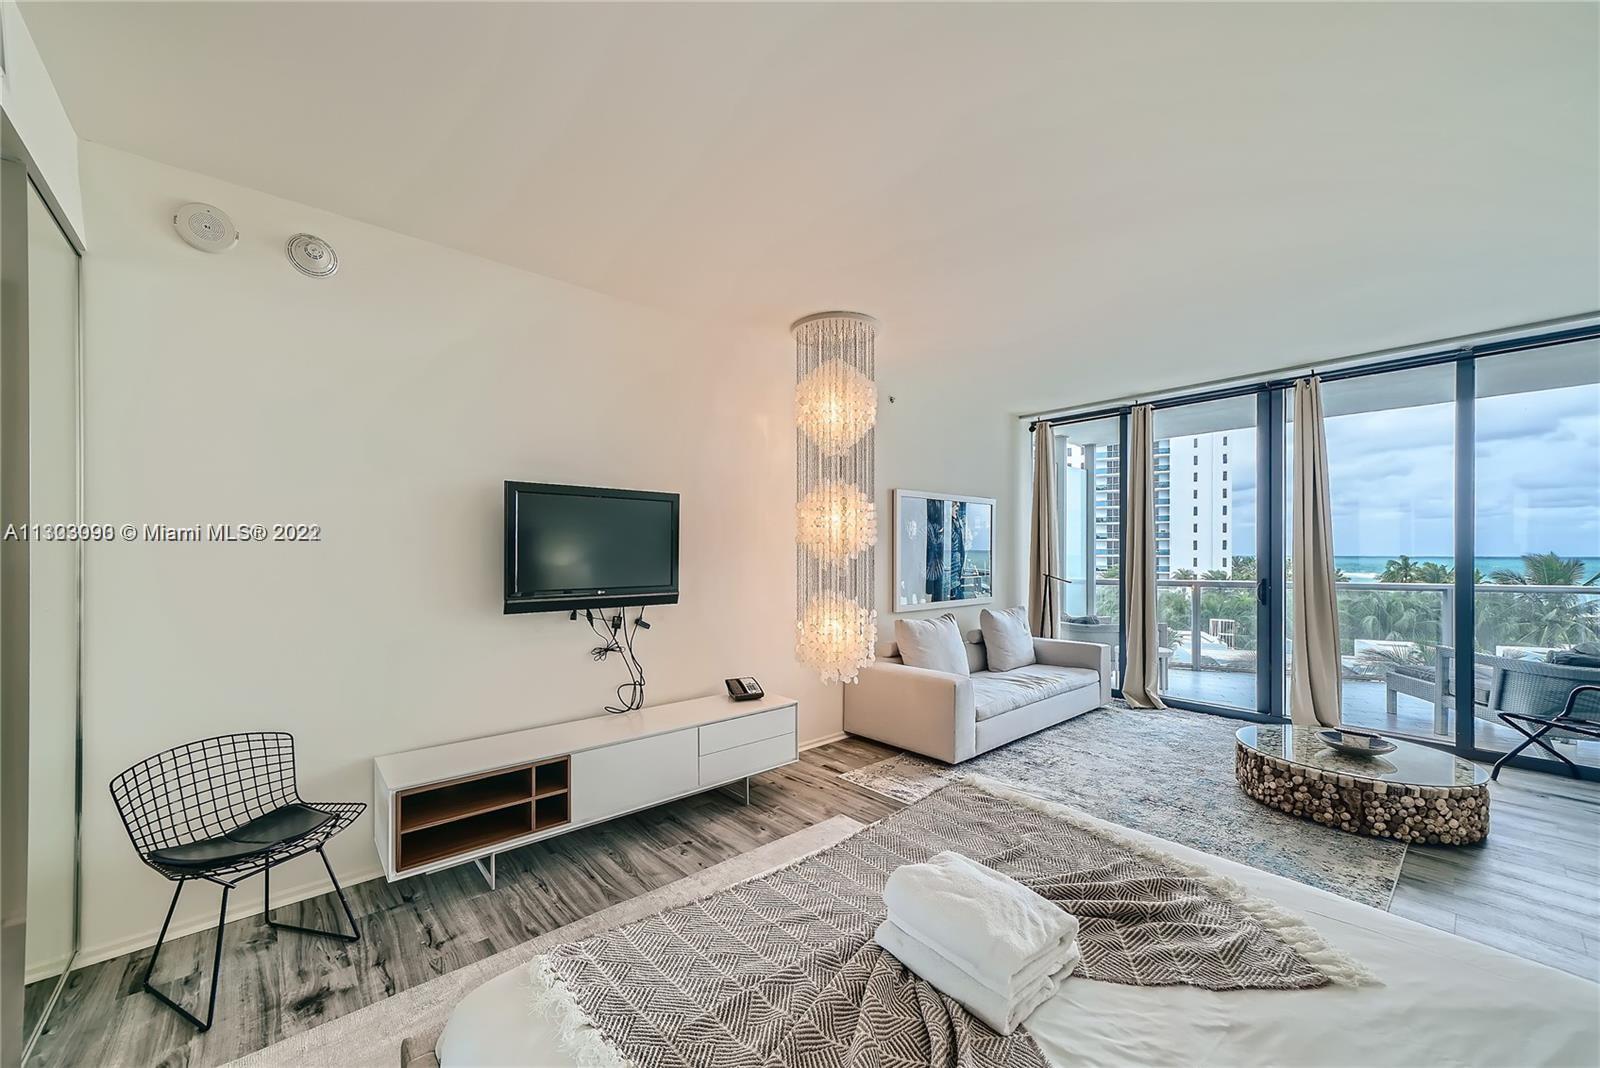 Listing Image 2201 Collins Ave #523